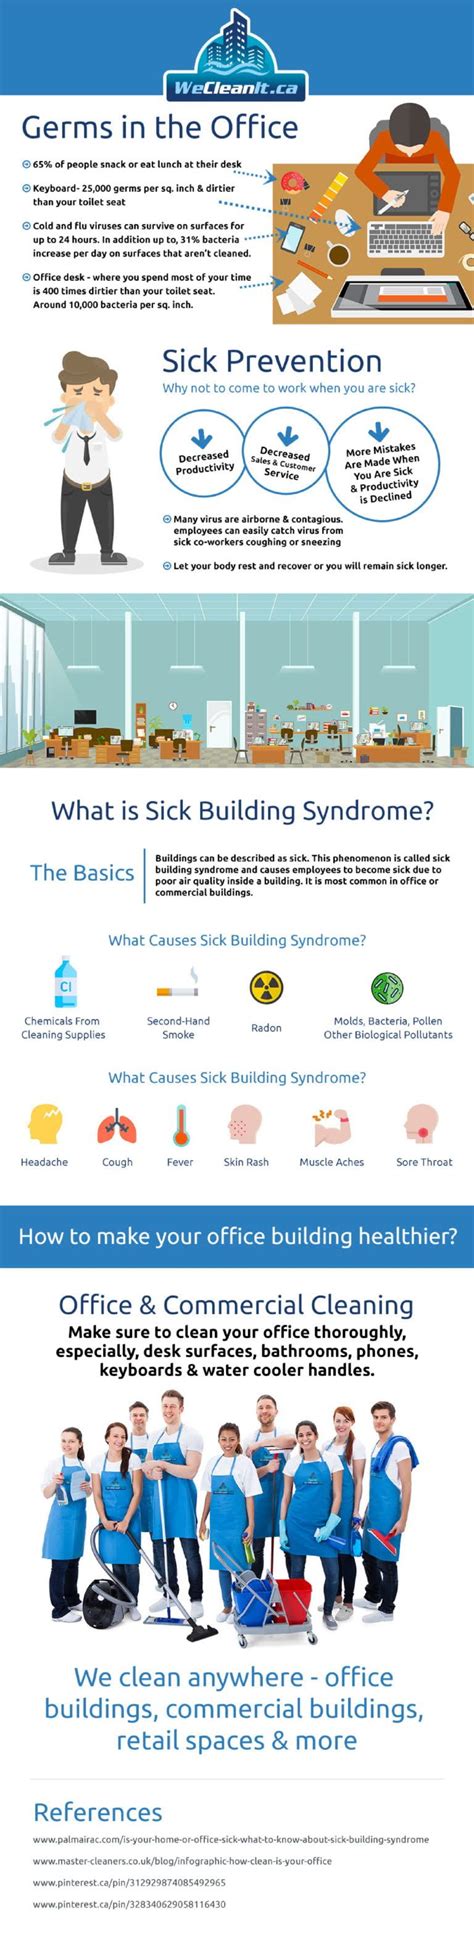 Less Employee Sick Days With Office Cleaning Infographic Visualistan